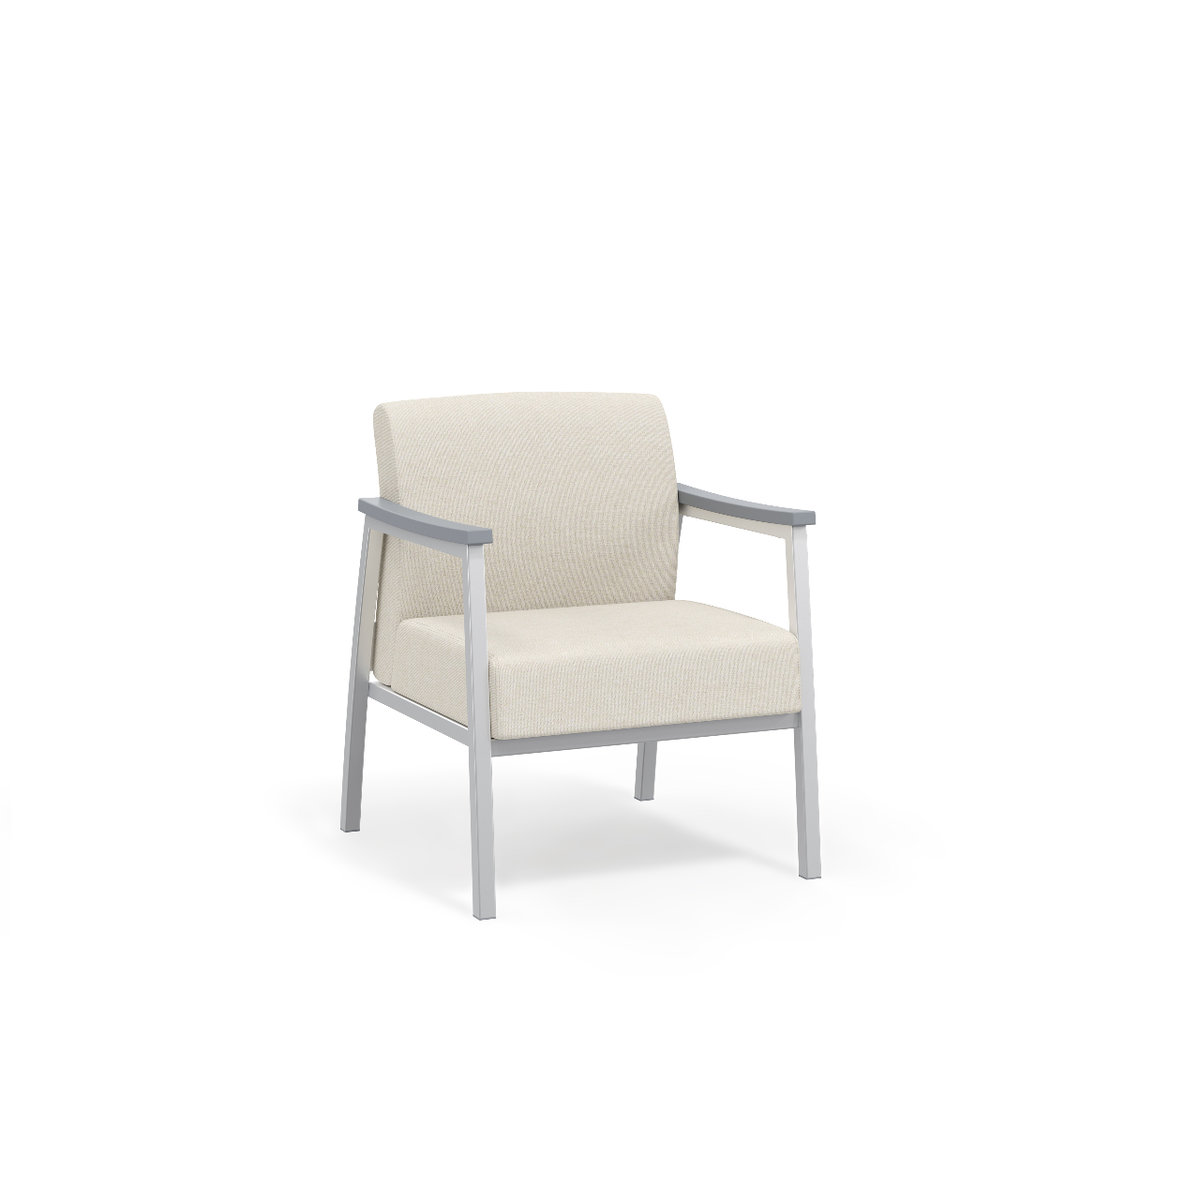 Single chair, open arms Photo